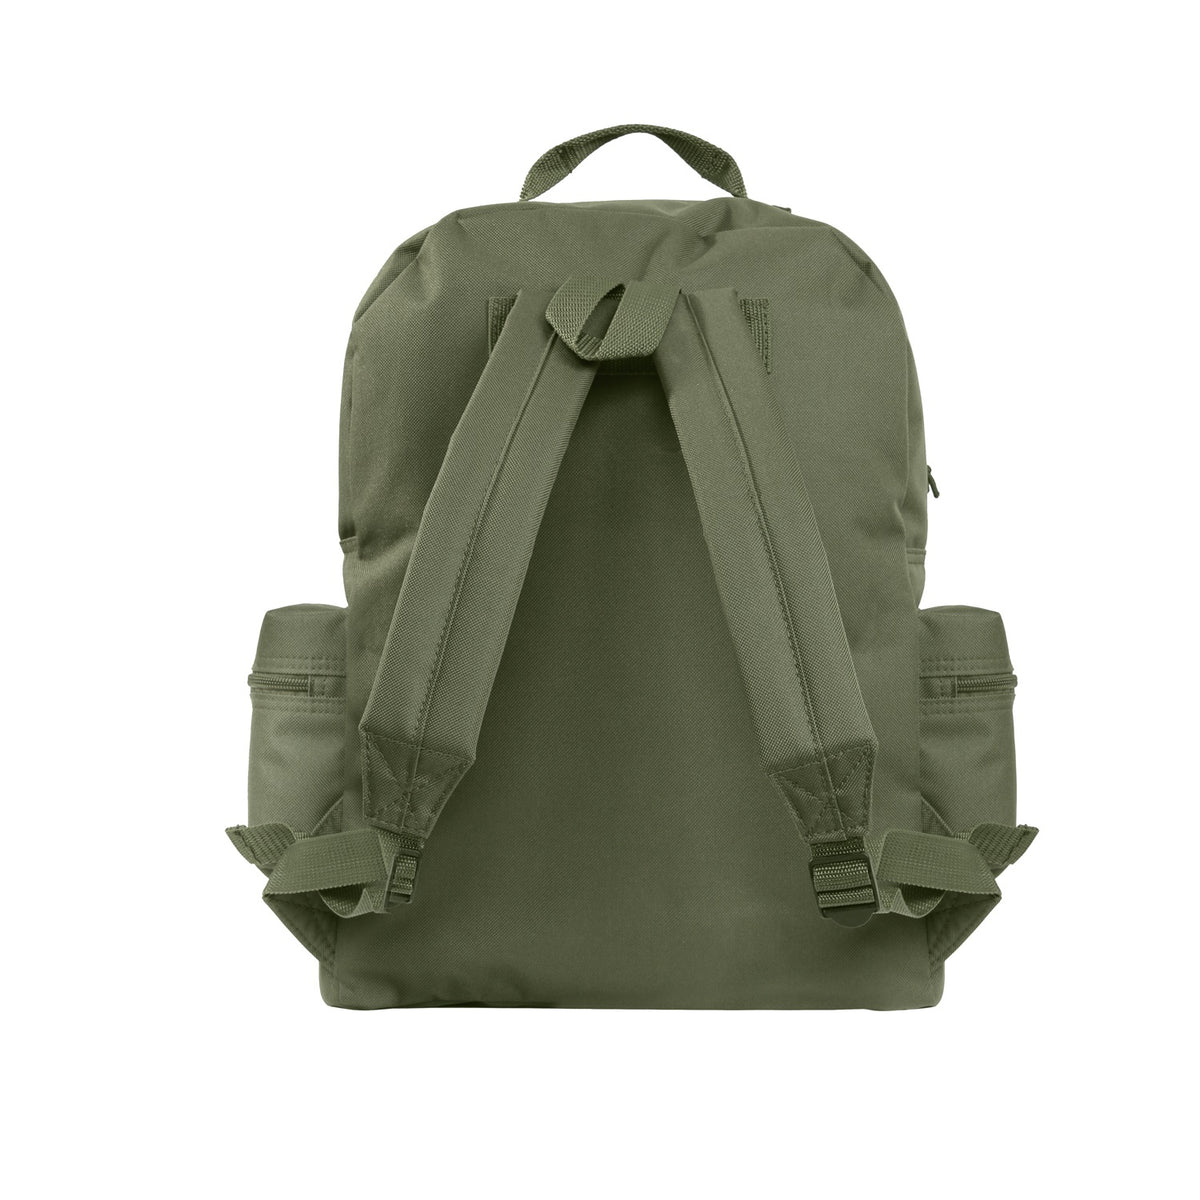 Rothco Deluxe Day Pack Olive Drab